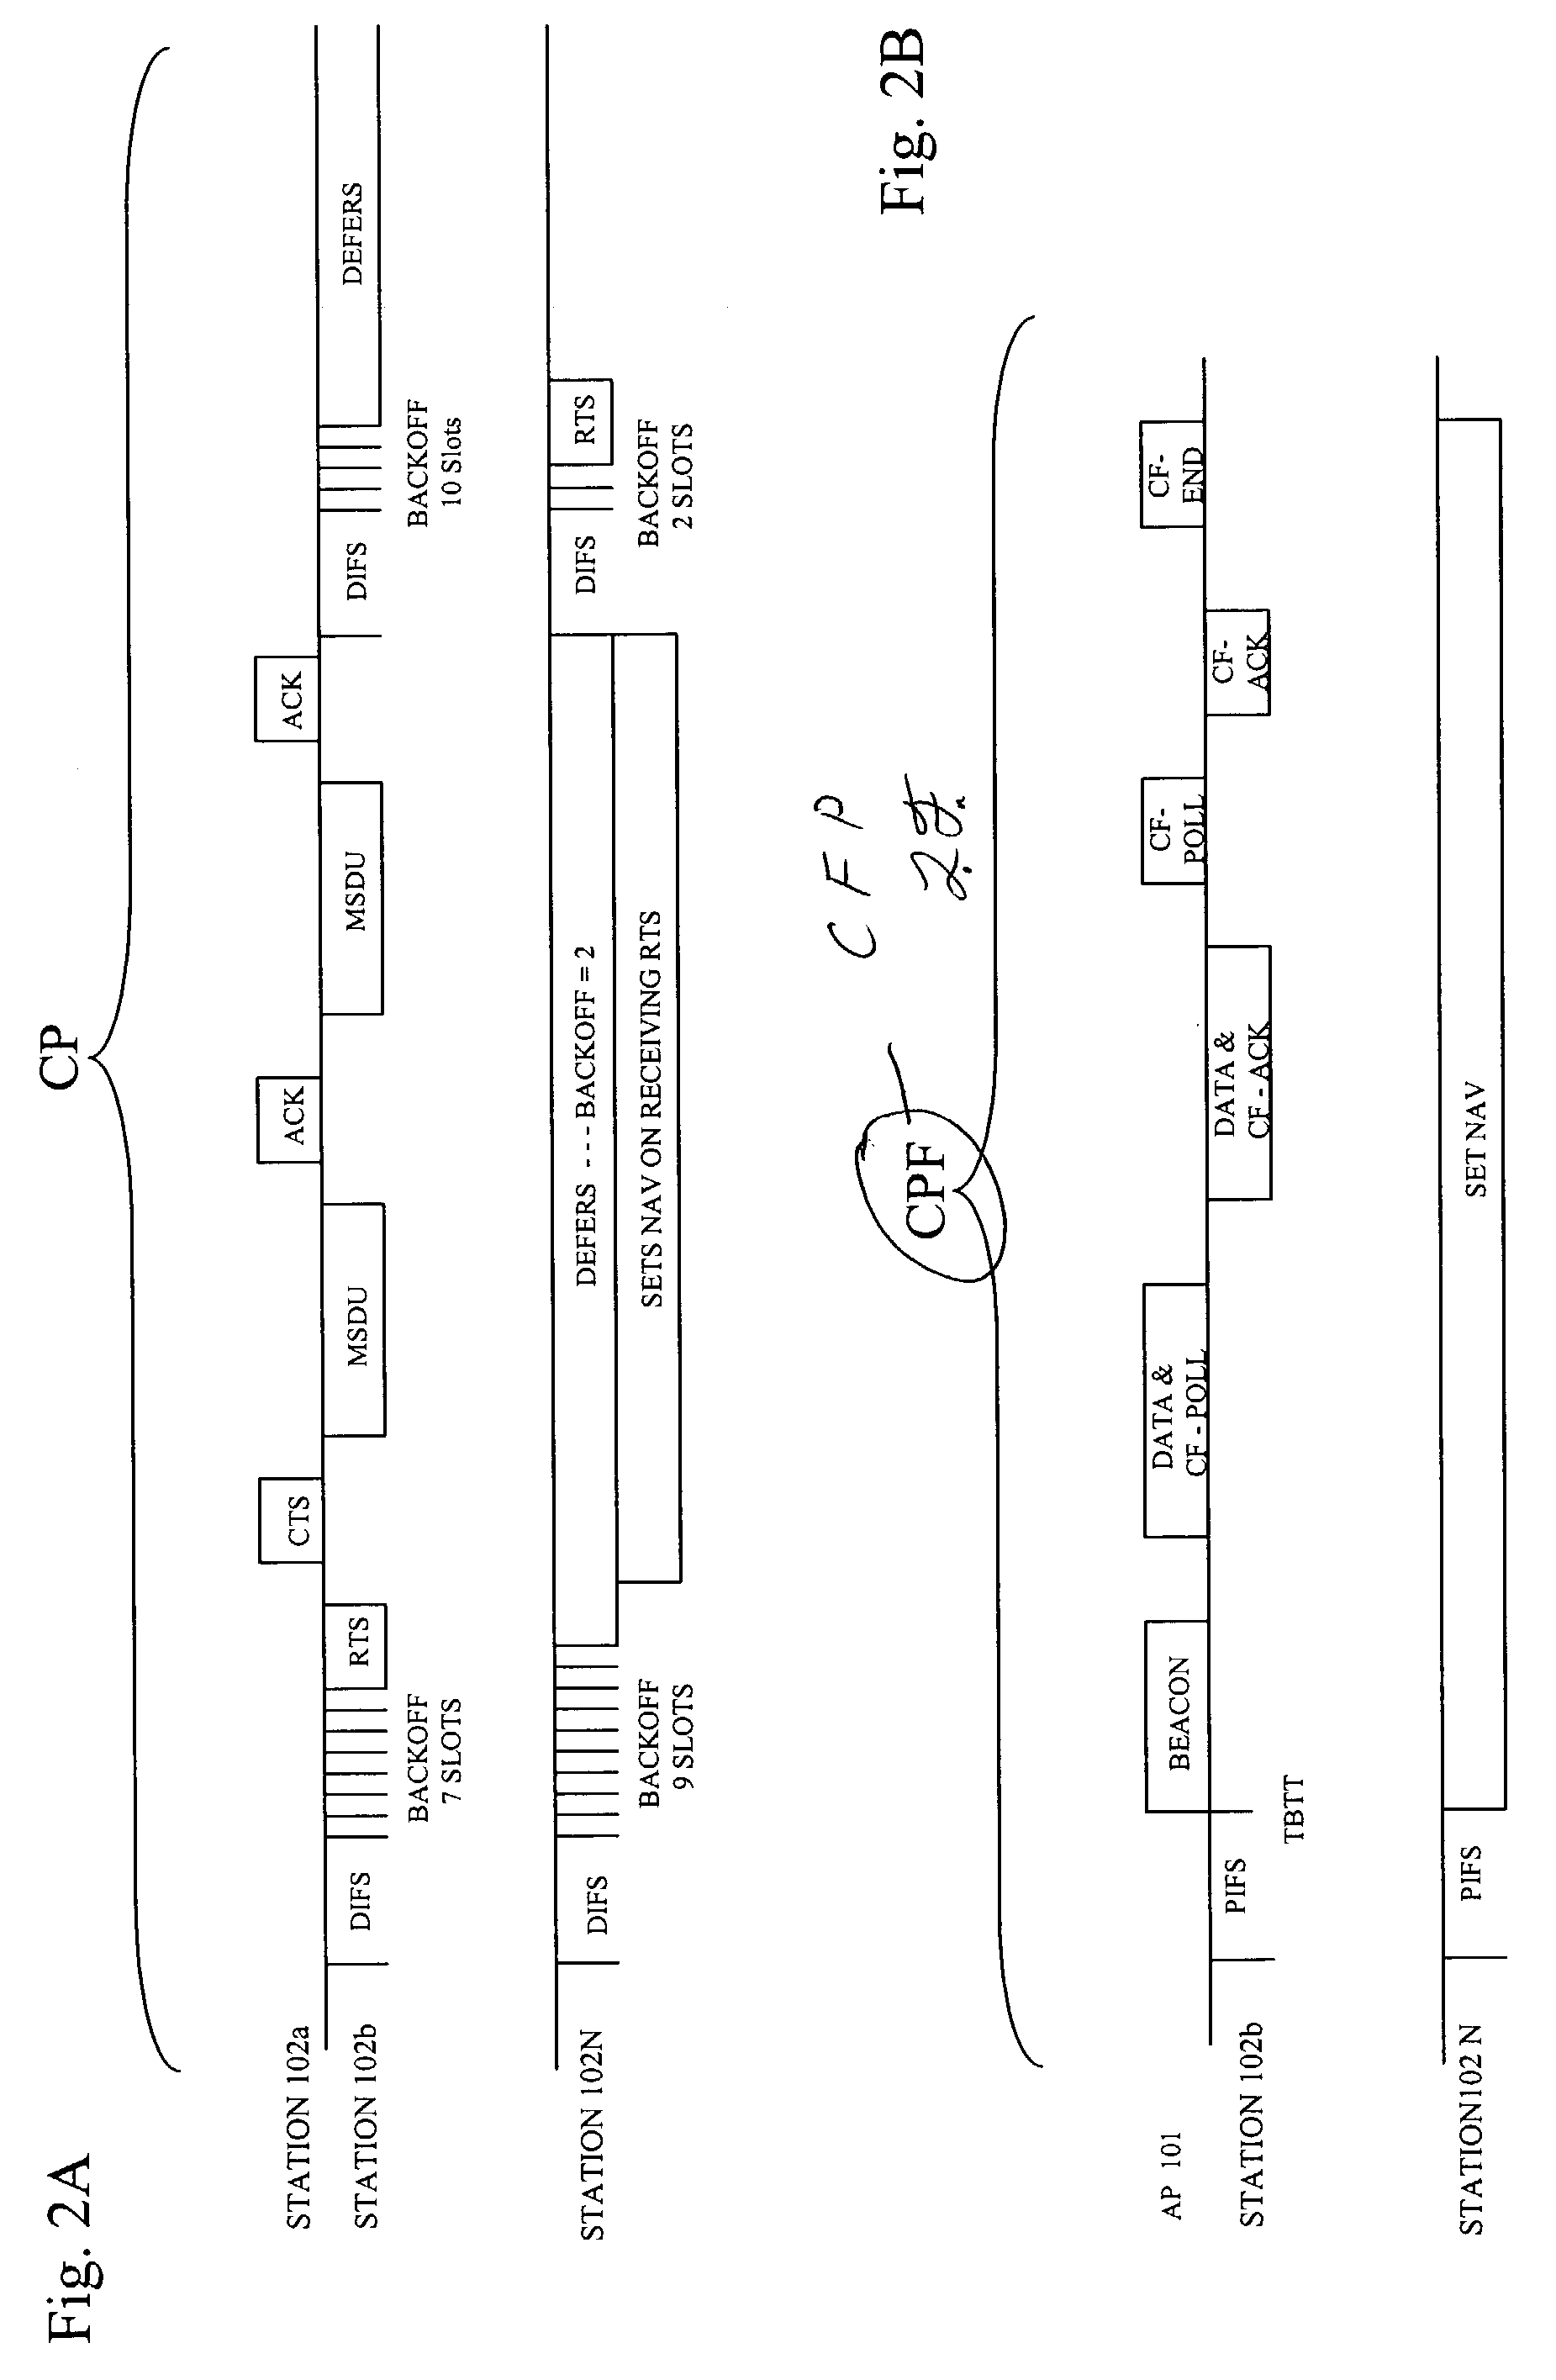 Data structures with amortized control overhead and methods and networks using the same